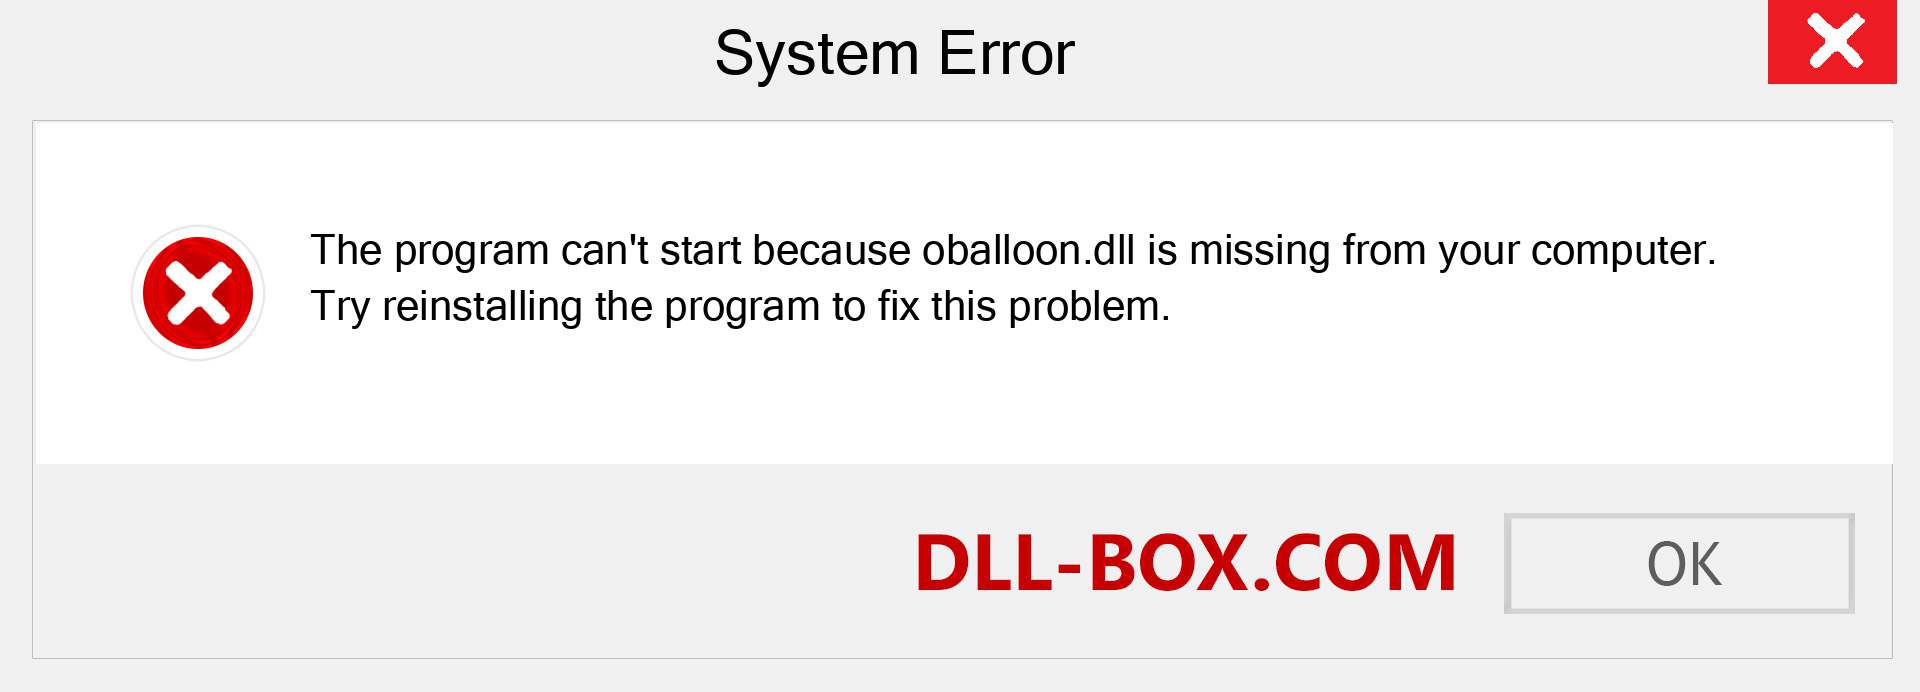  oballoon.dll file is missing?. Download for Windows 7, 8, 10 - Fix  oballoon dll Missing Error on Windows, photos, images